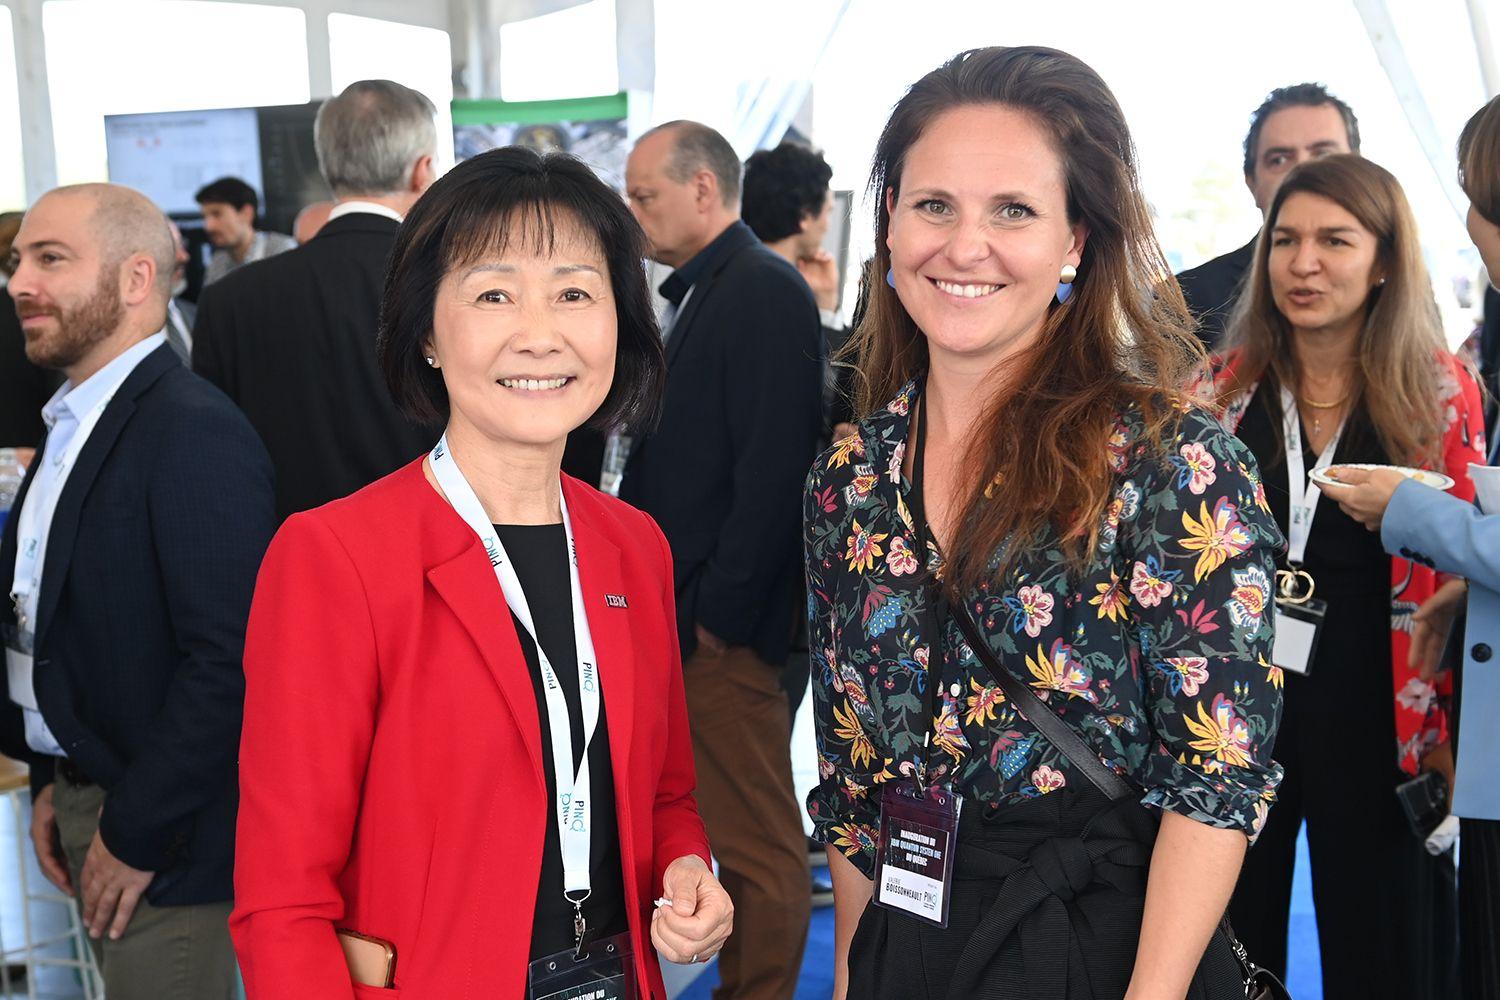 Pictured, L-R: Ruoyi Zhou, Executive Director, IBM's Discovery Accelerator, Valérie Boissonneault, Director, Innovation Zone of Québec